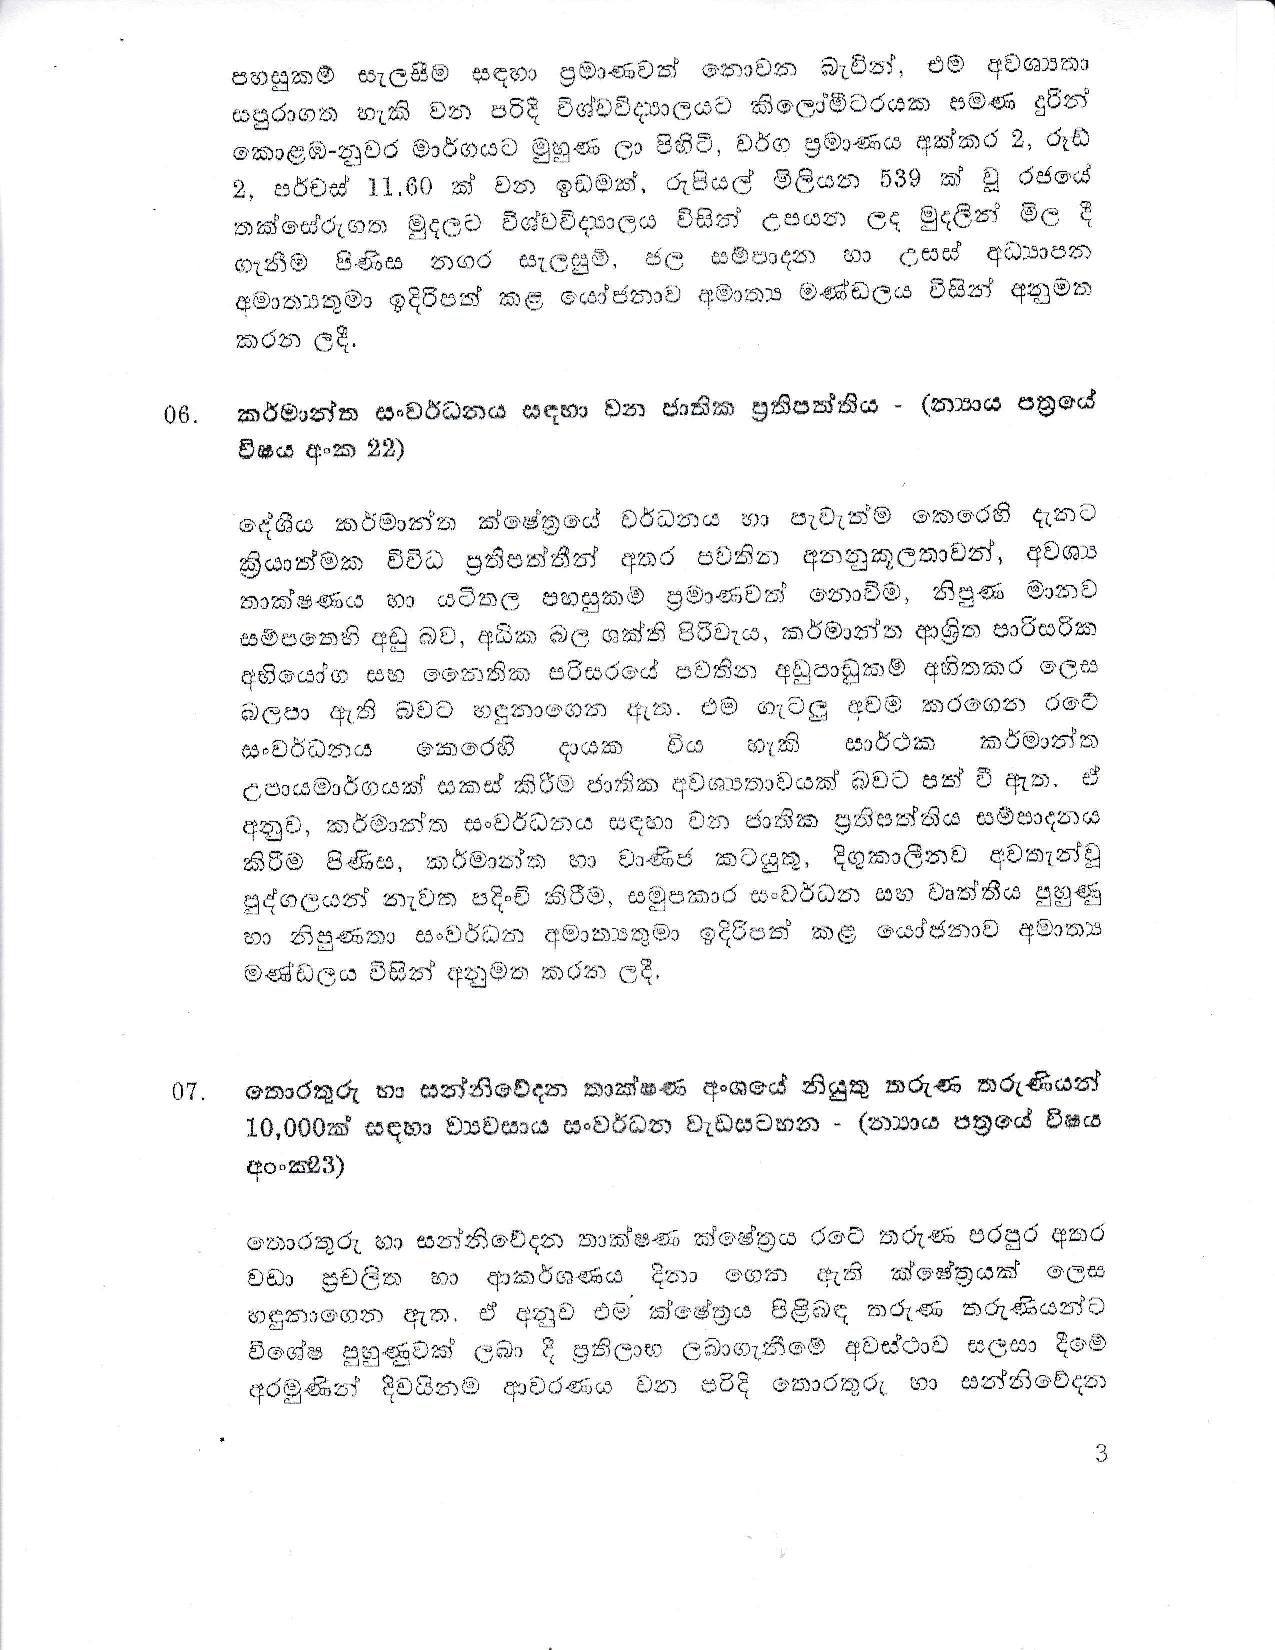 Cabinet Decision on 20.08.2019 1 page 003